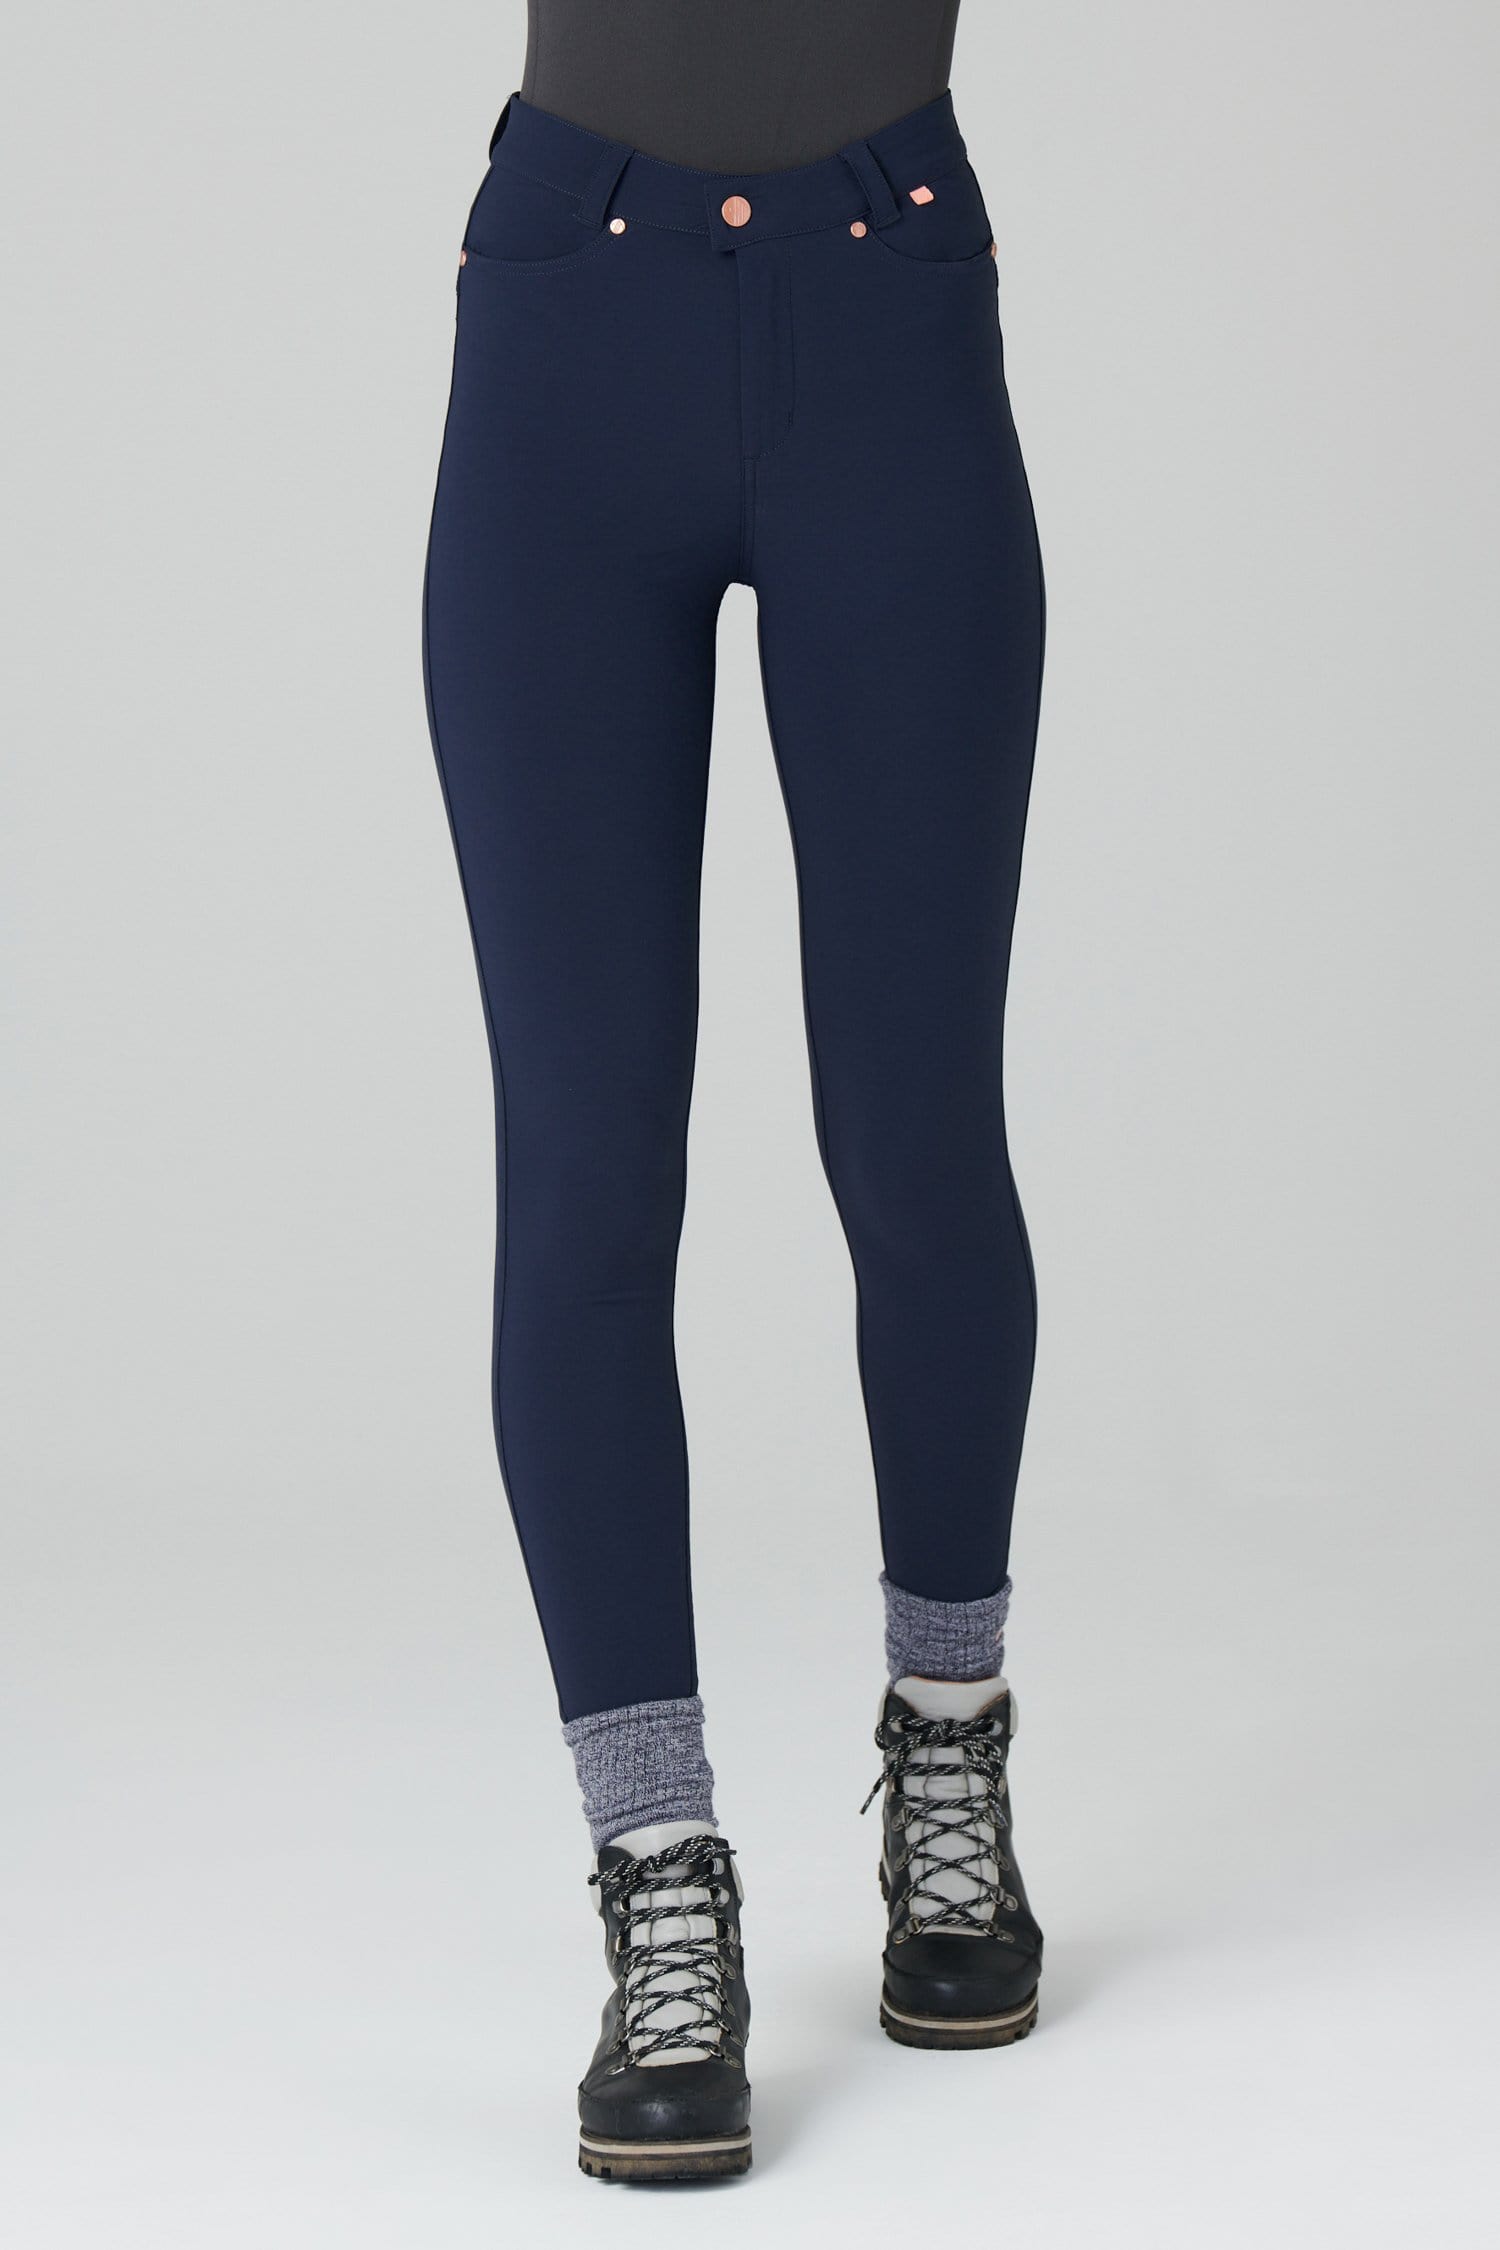 Max Stretch Skinny Outdoor Trousers - Deep Navy - 32xl / Uk14 - Womens - Acai Outdoorwear